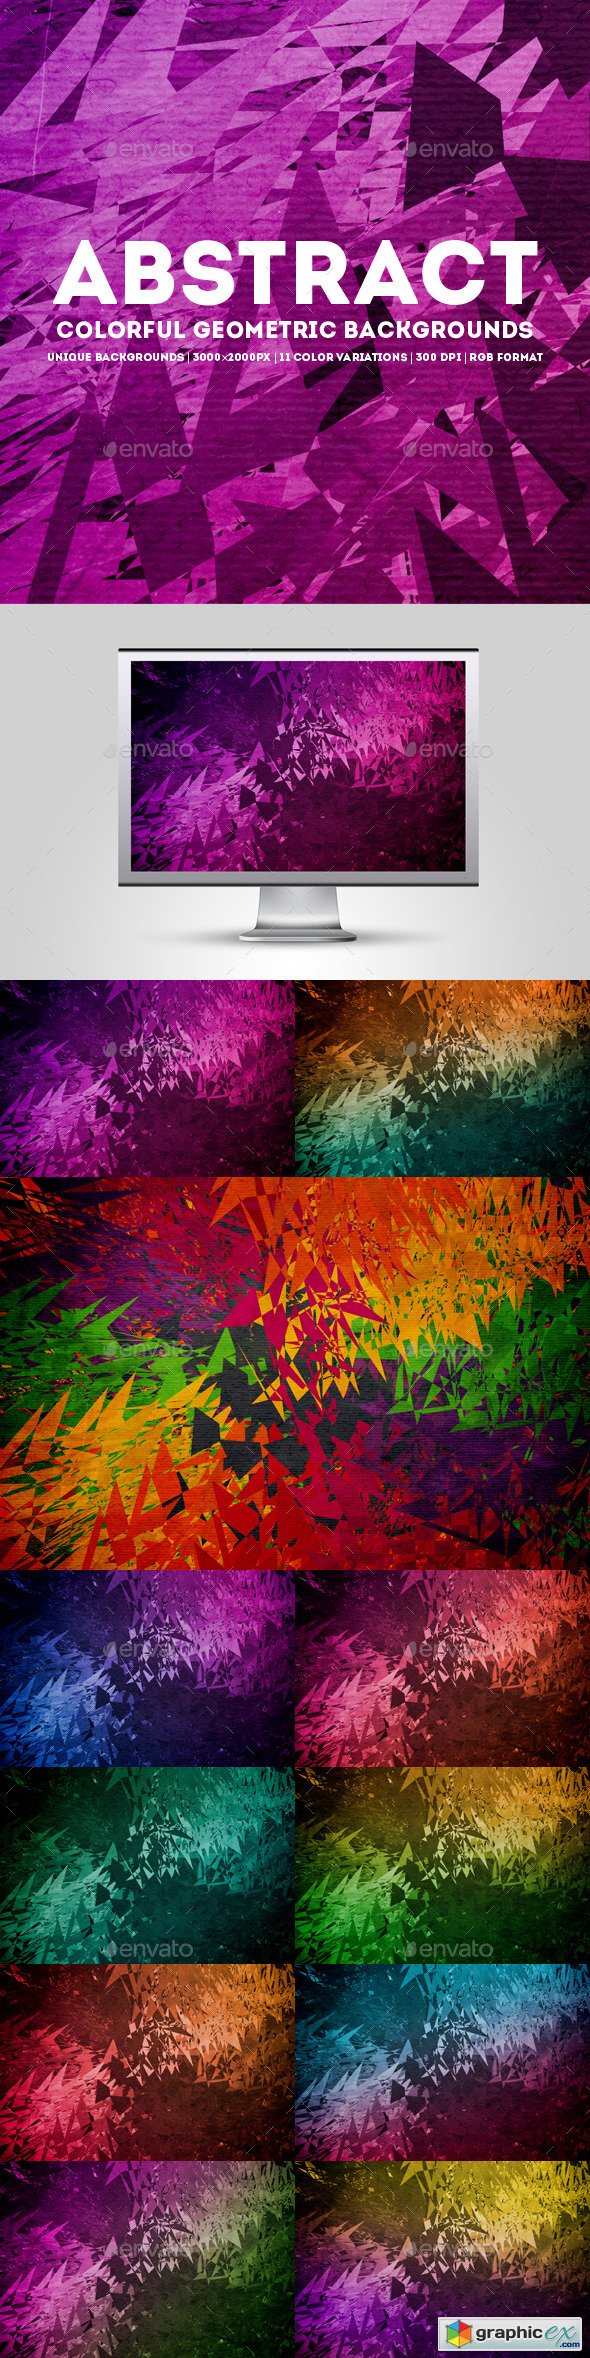 Abstract Colorful Geometric Backgrounds